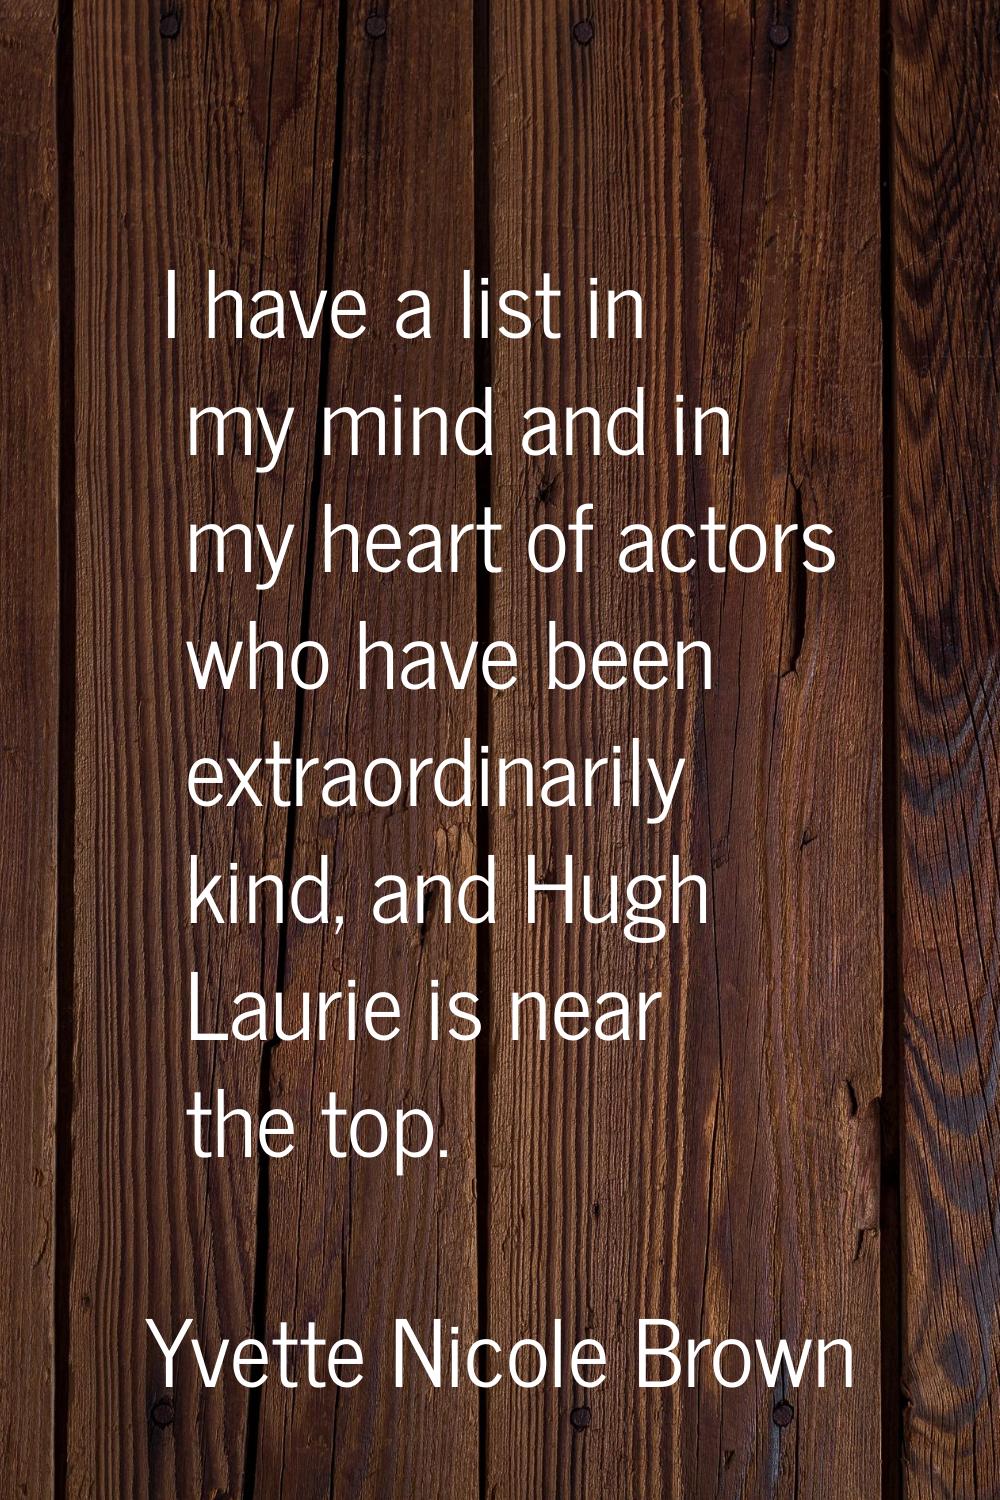 I have a list in my mind and in my heart of actors who have been extraordinarily kind, and Hugh Lau